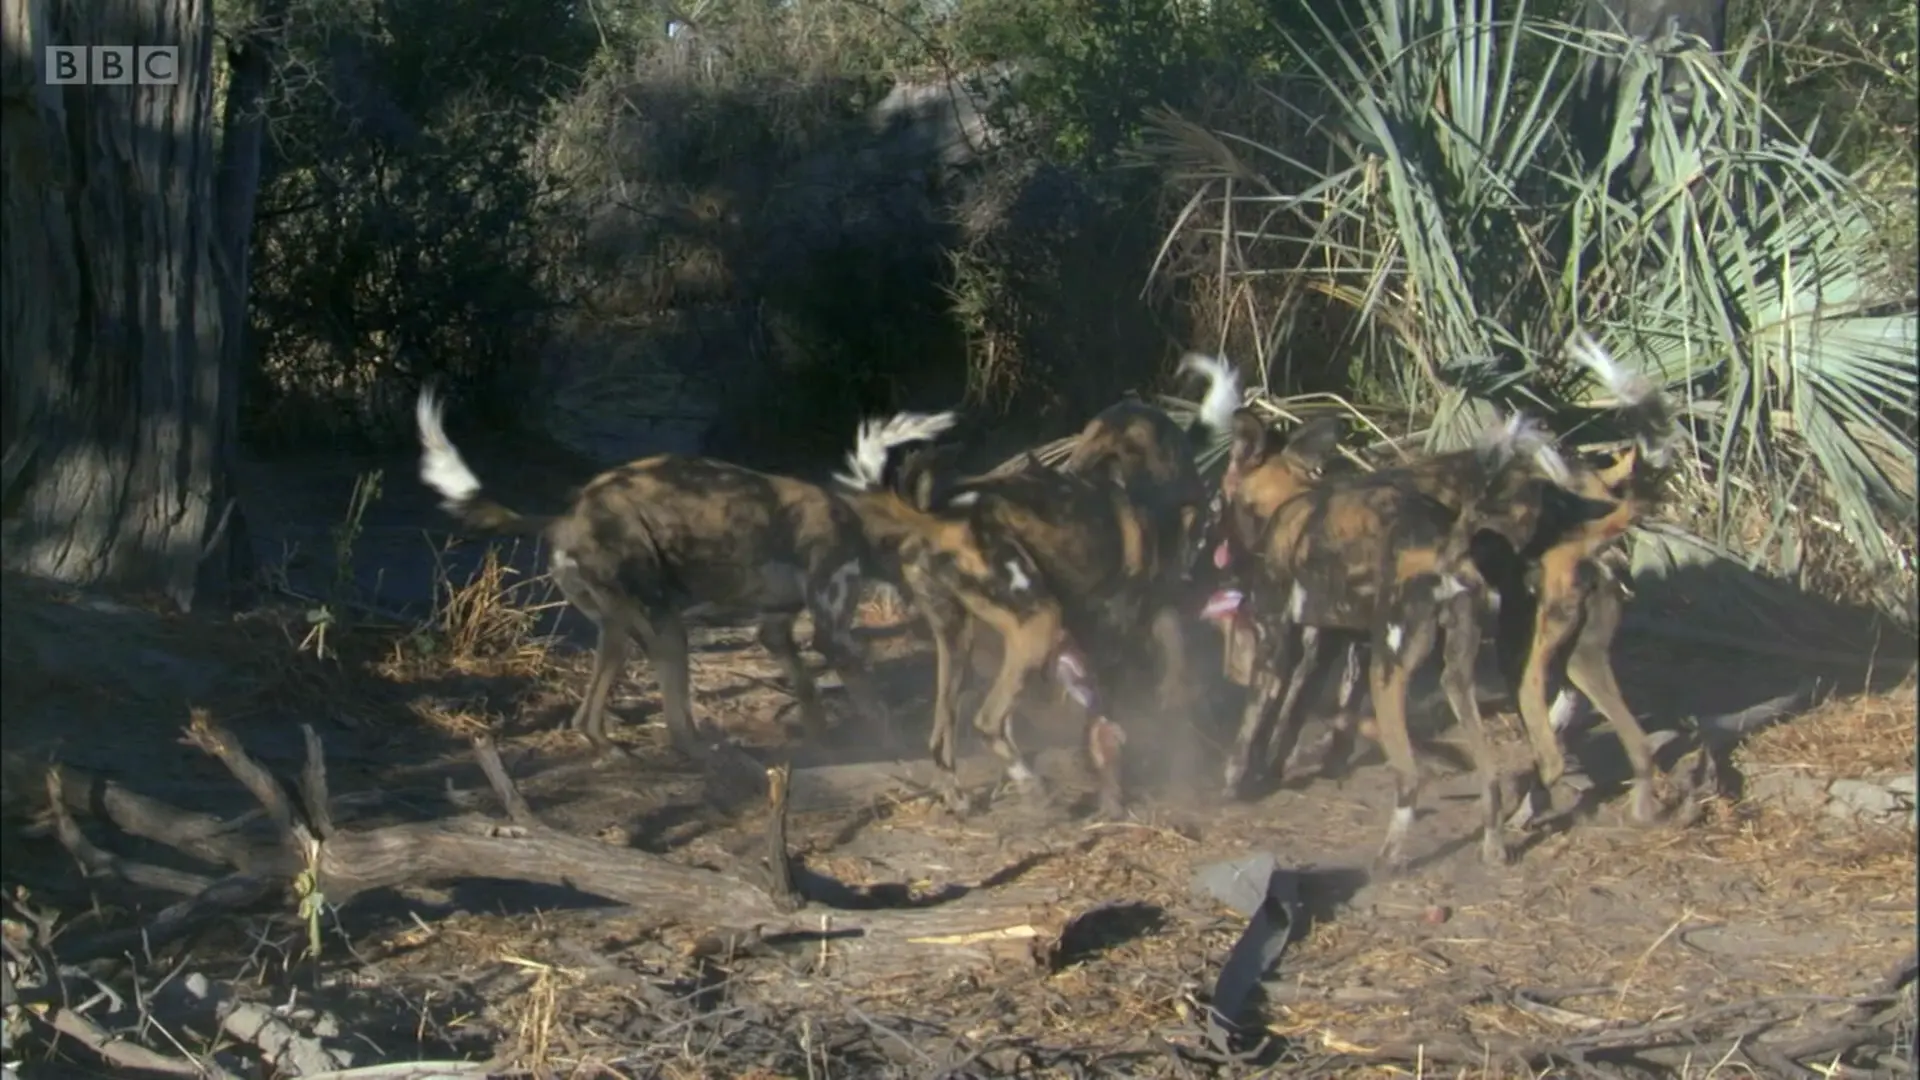 Cape wild dog (Lycaon pictus pictus) as shown in Planet Earth - From Pole to Pole